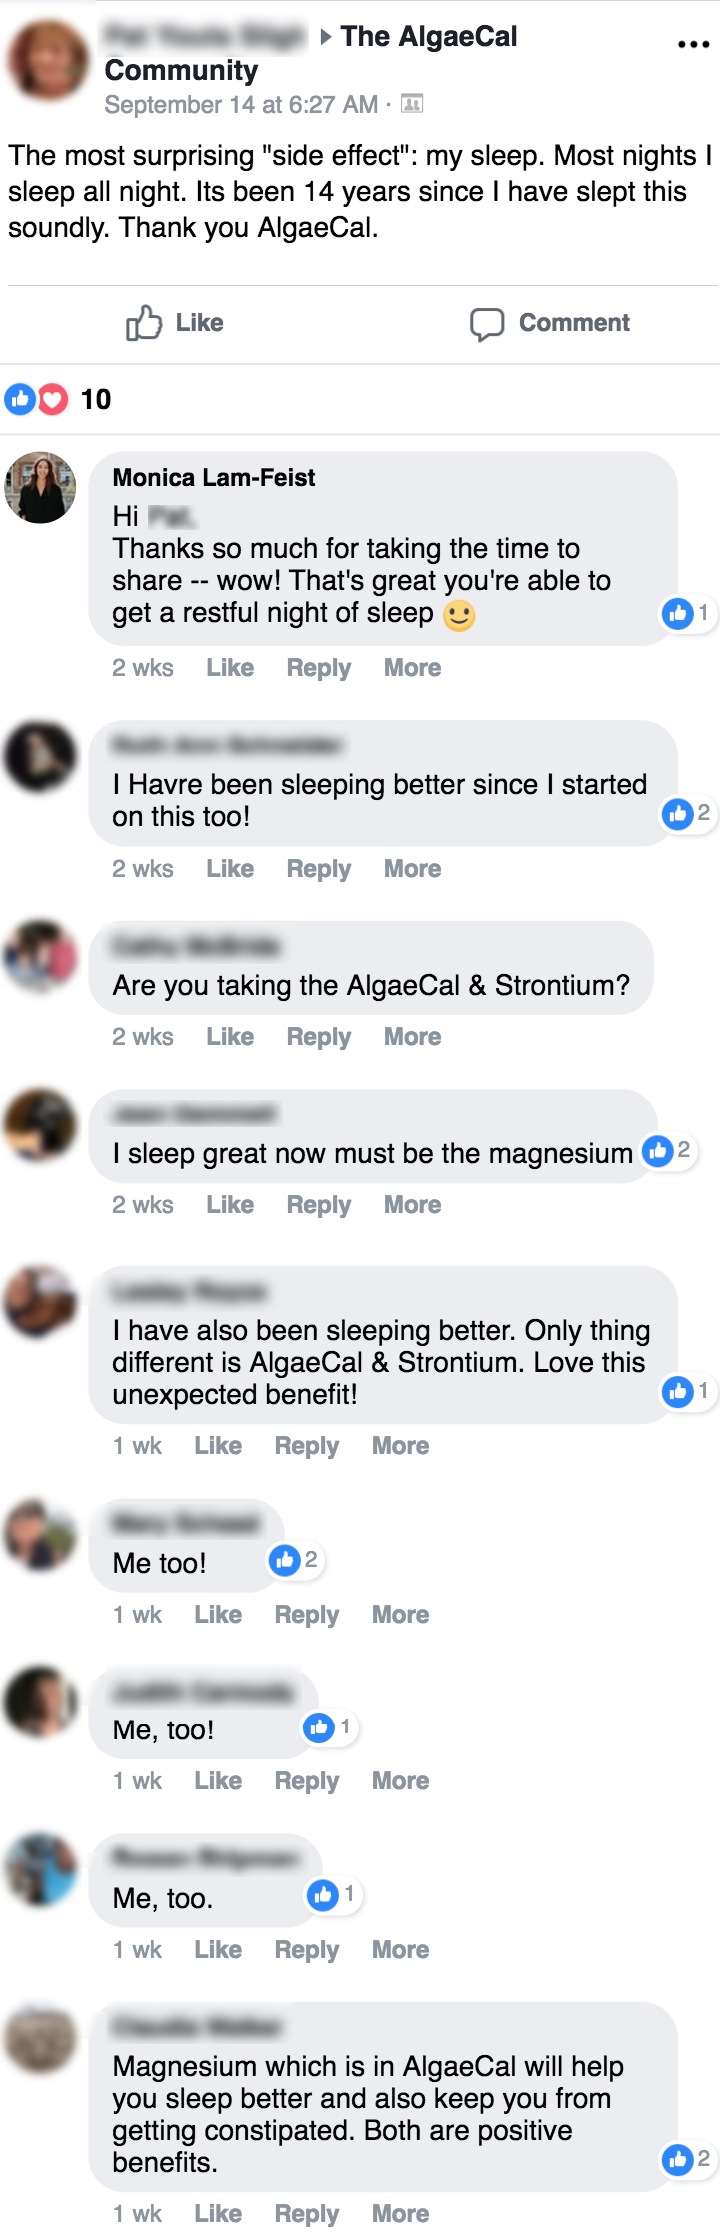 I sleep great now. It must be the magnesium